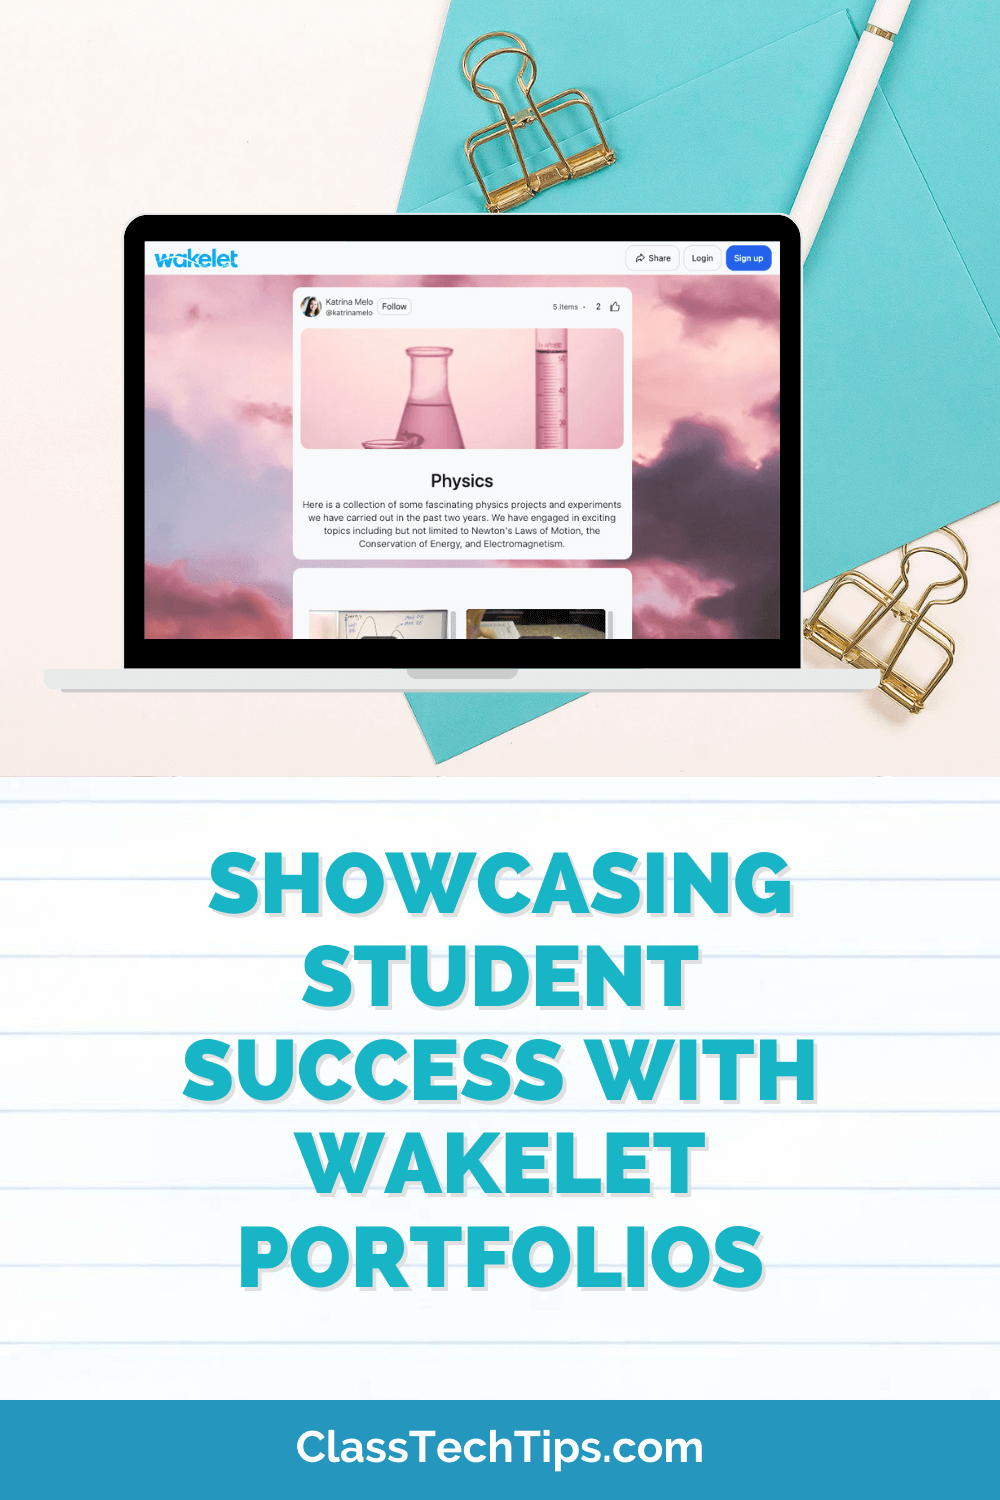 A Pinterest-style graphic for a blog post featuring a laptop displaying a collection of physics projects on Wakelet. The heading "Showcasing Student Success with Wakelet Portfolios" in bold teal font is set against a lined paper graphic and stationery-themed backdrop.